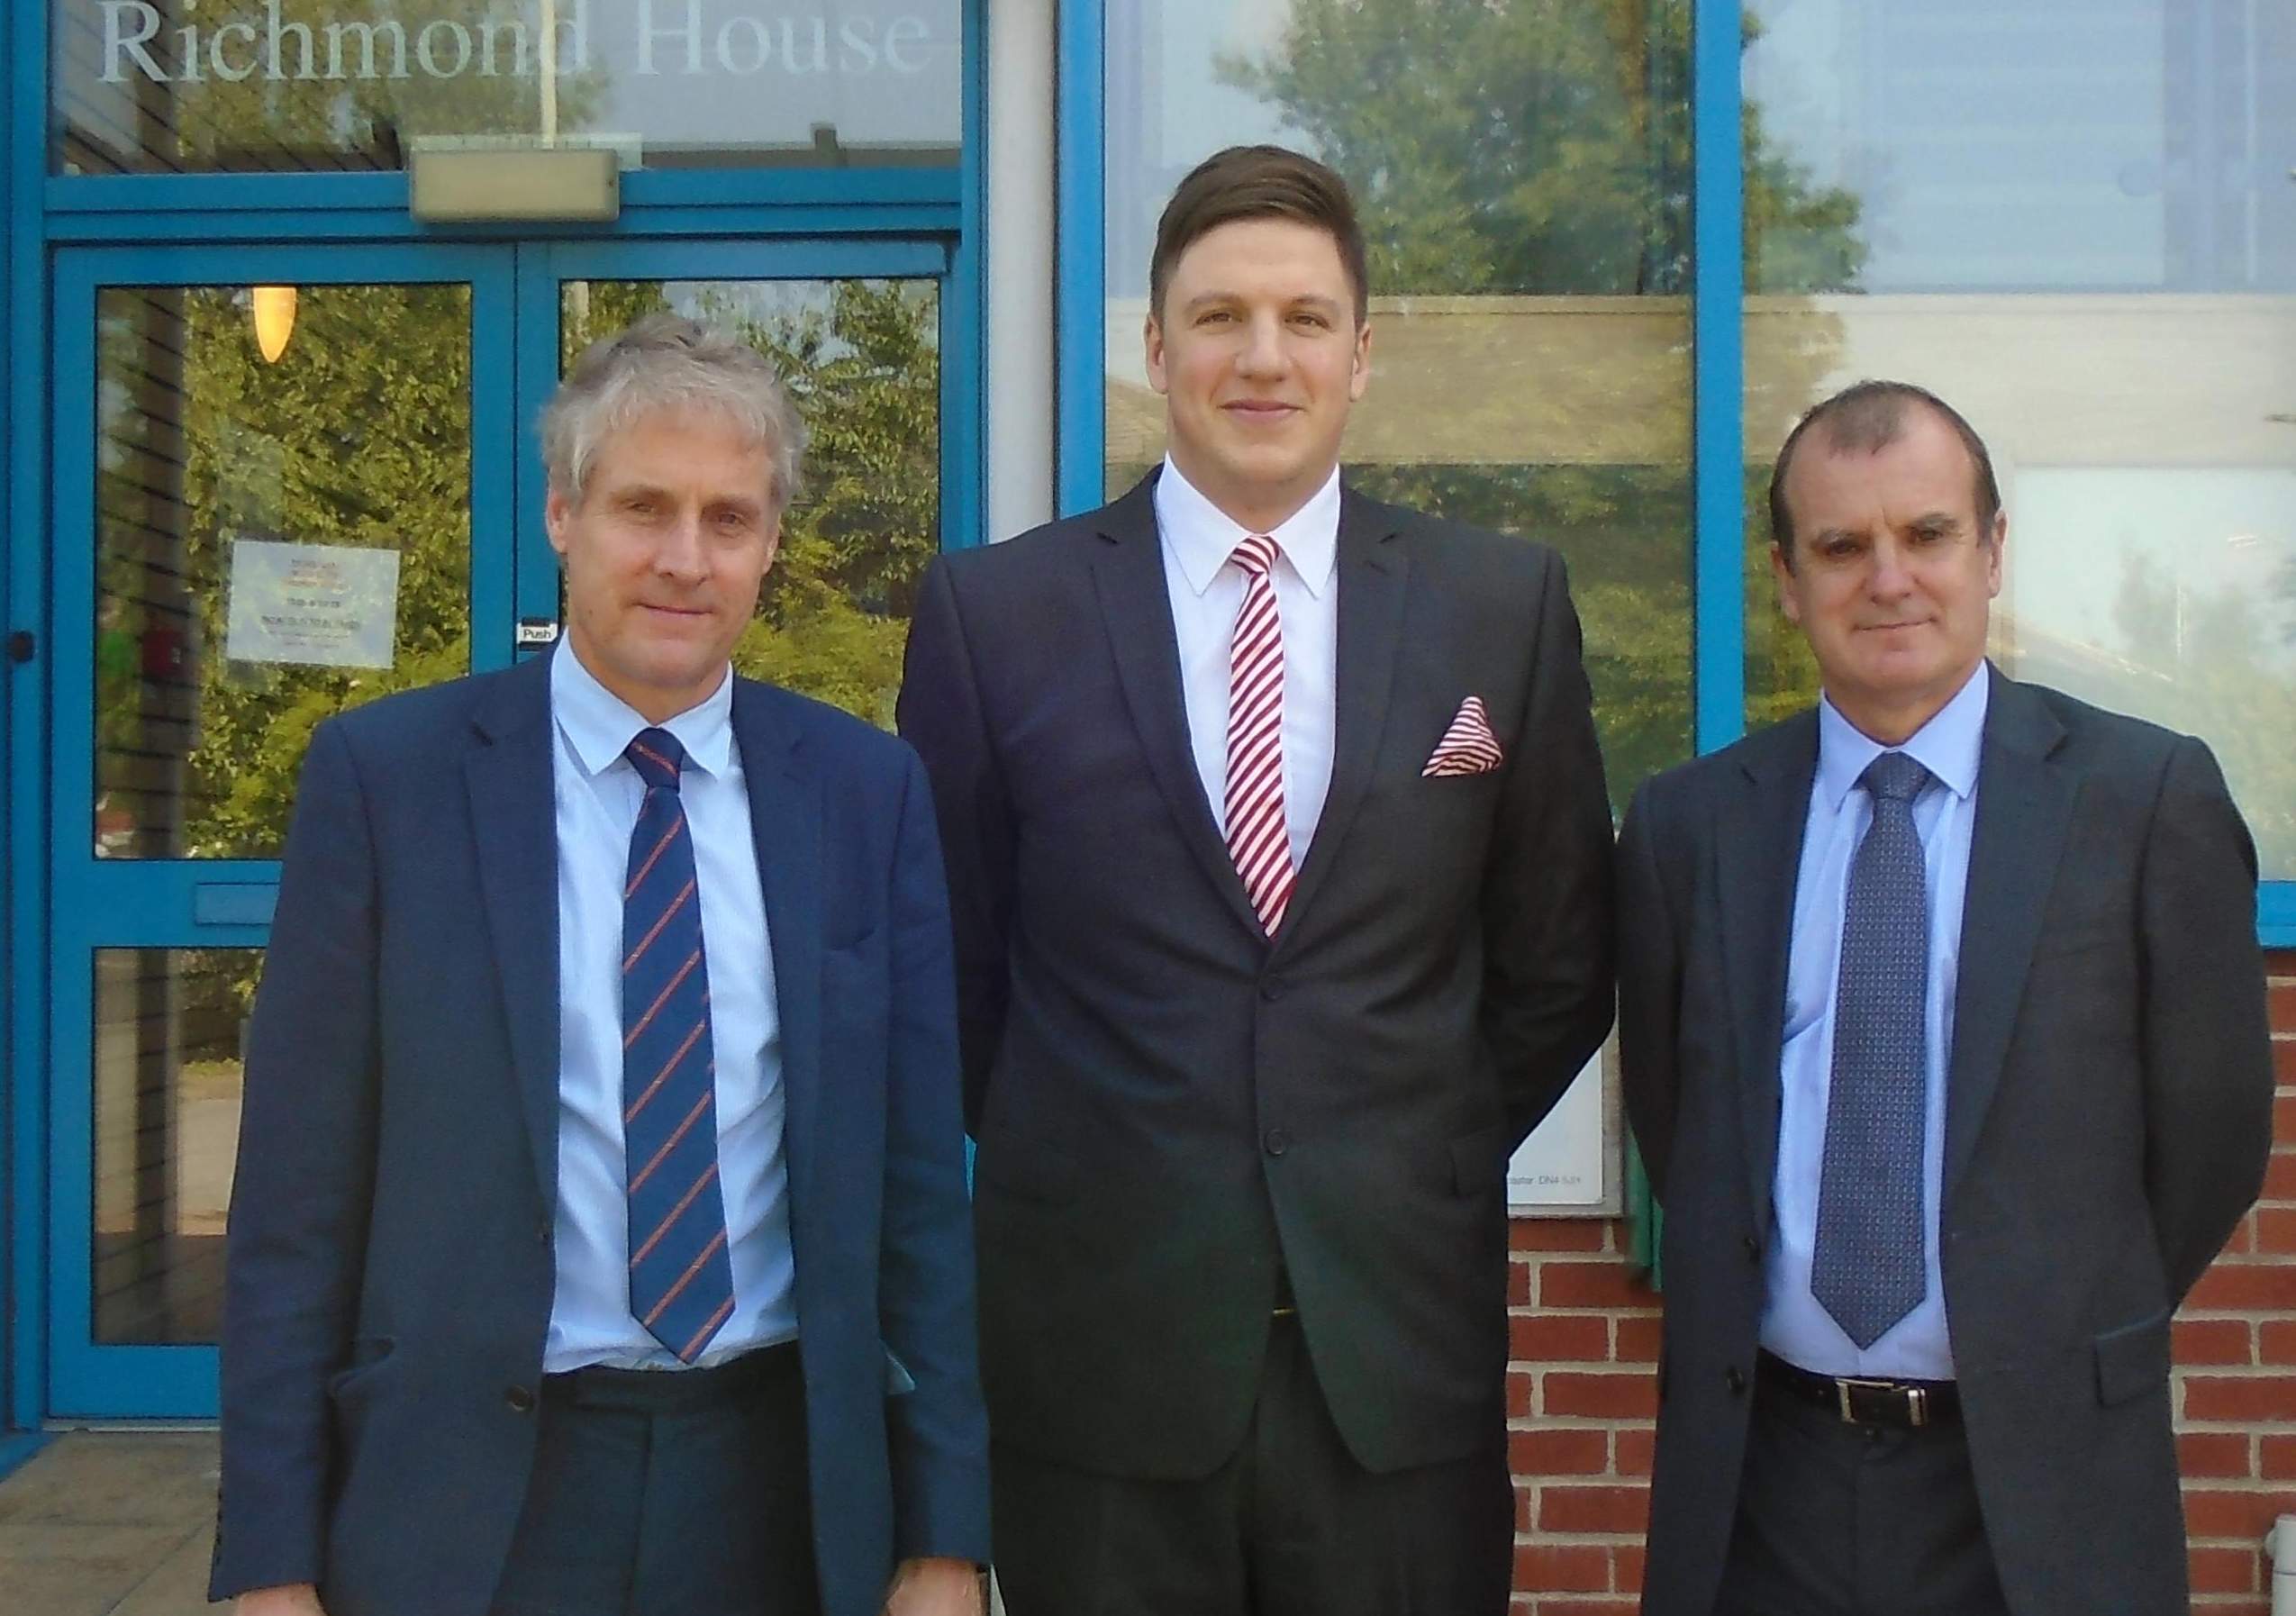 PPH EXPANDS ITS DONCASTER OPERATIONS